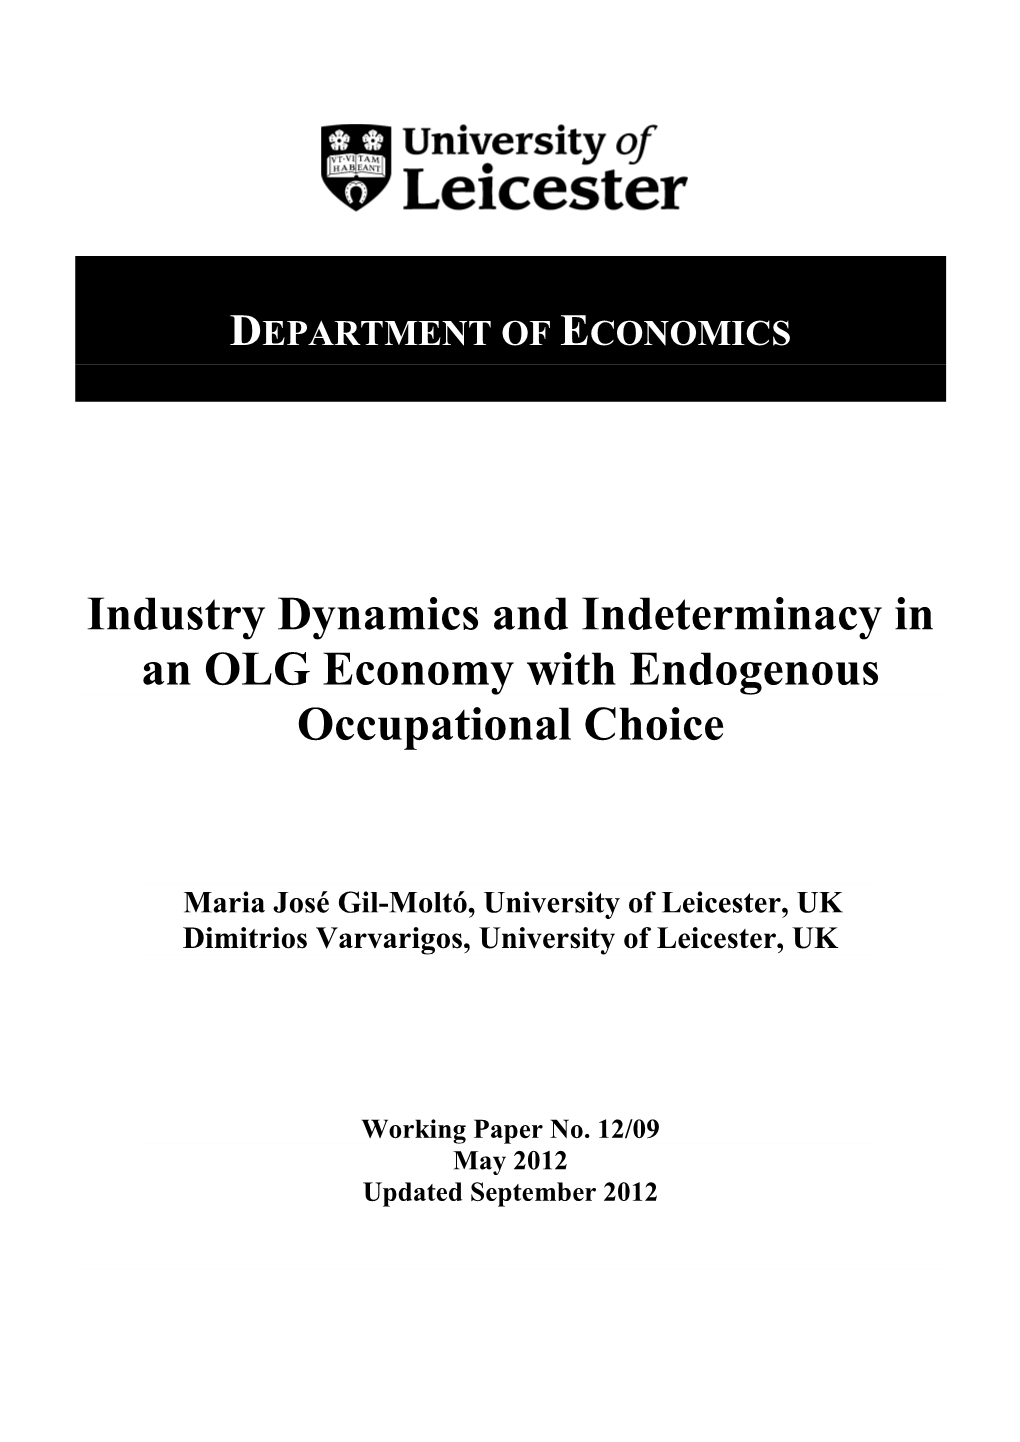 Industry Dynamics and Indeterminacy in an OLG Economy with Endogenous Occupational Choice